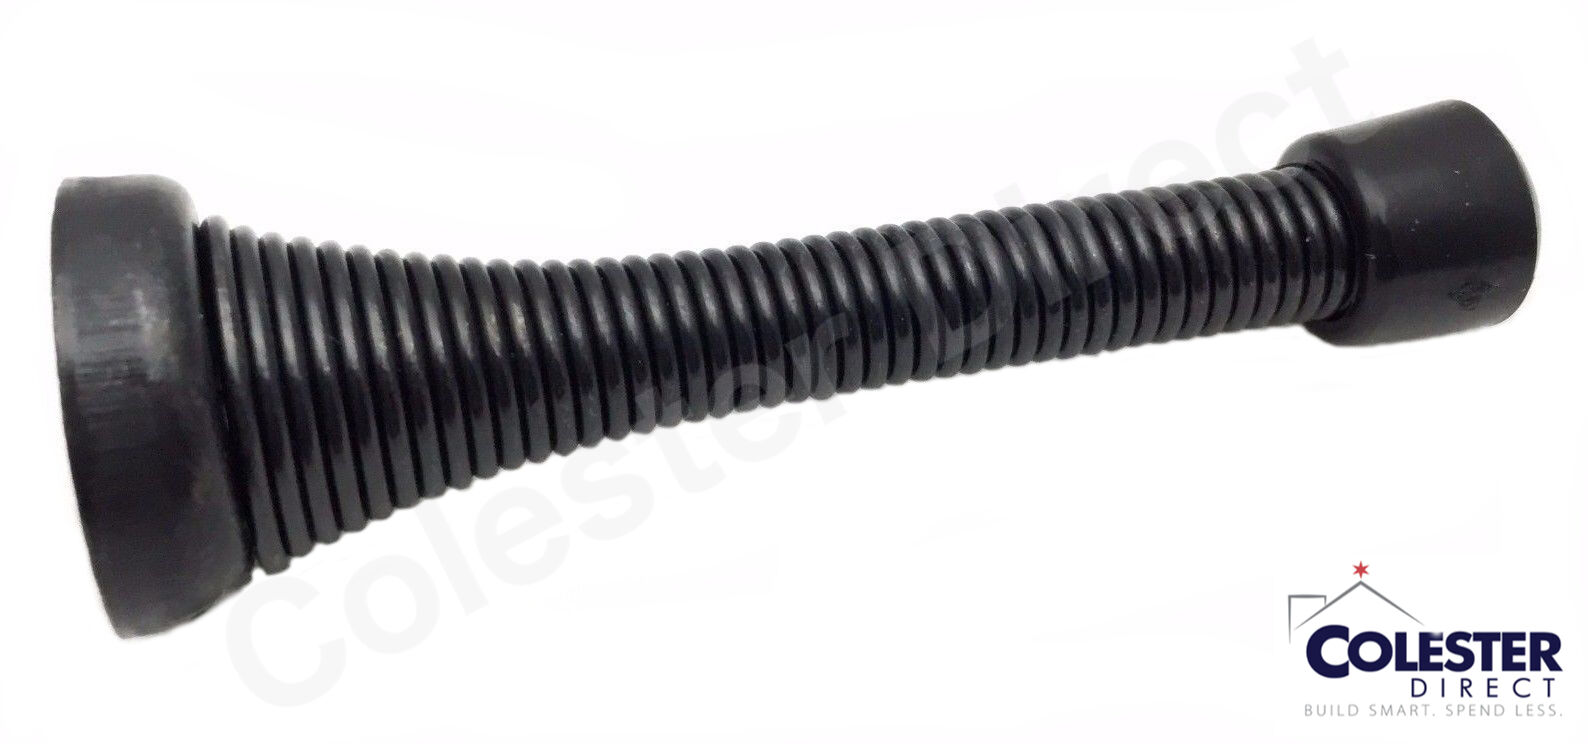 Qty 10 Oil Rubbed Bronze Flexible Spring Door Stop Stopper 3 1/8" Rubber Tip Colester Direct 901000008